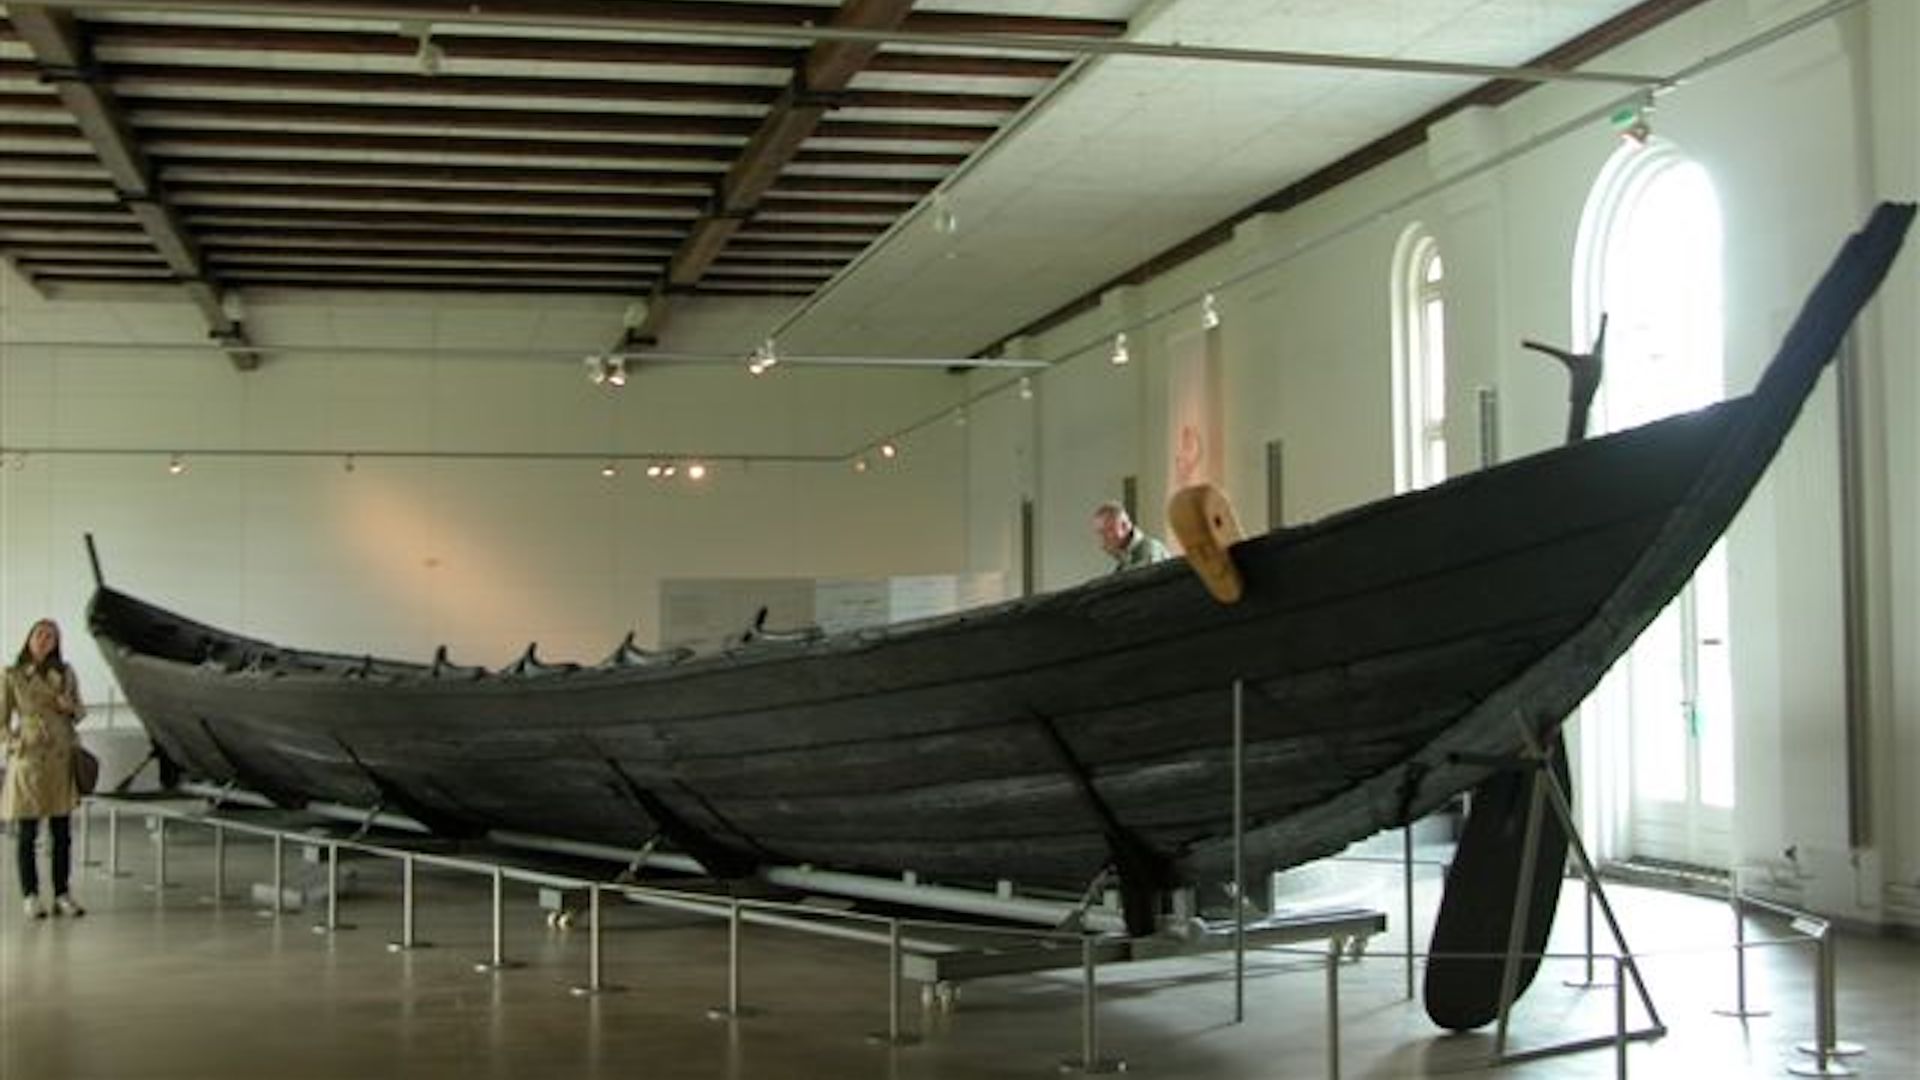 The Nydam boat on display in a museum